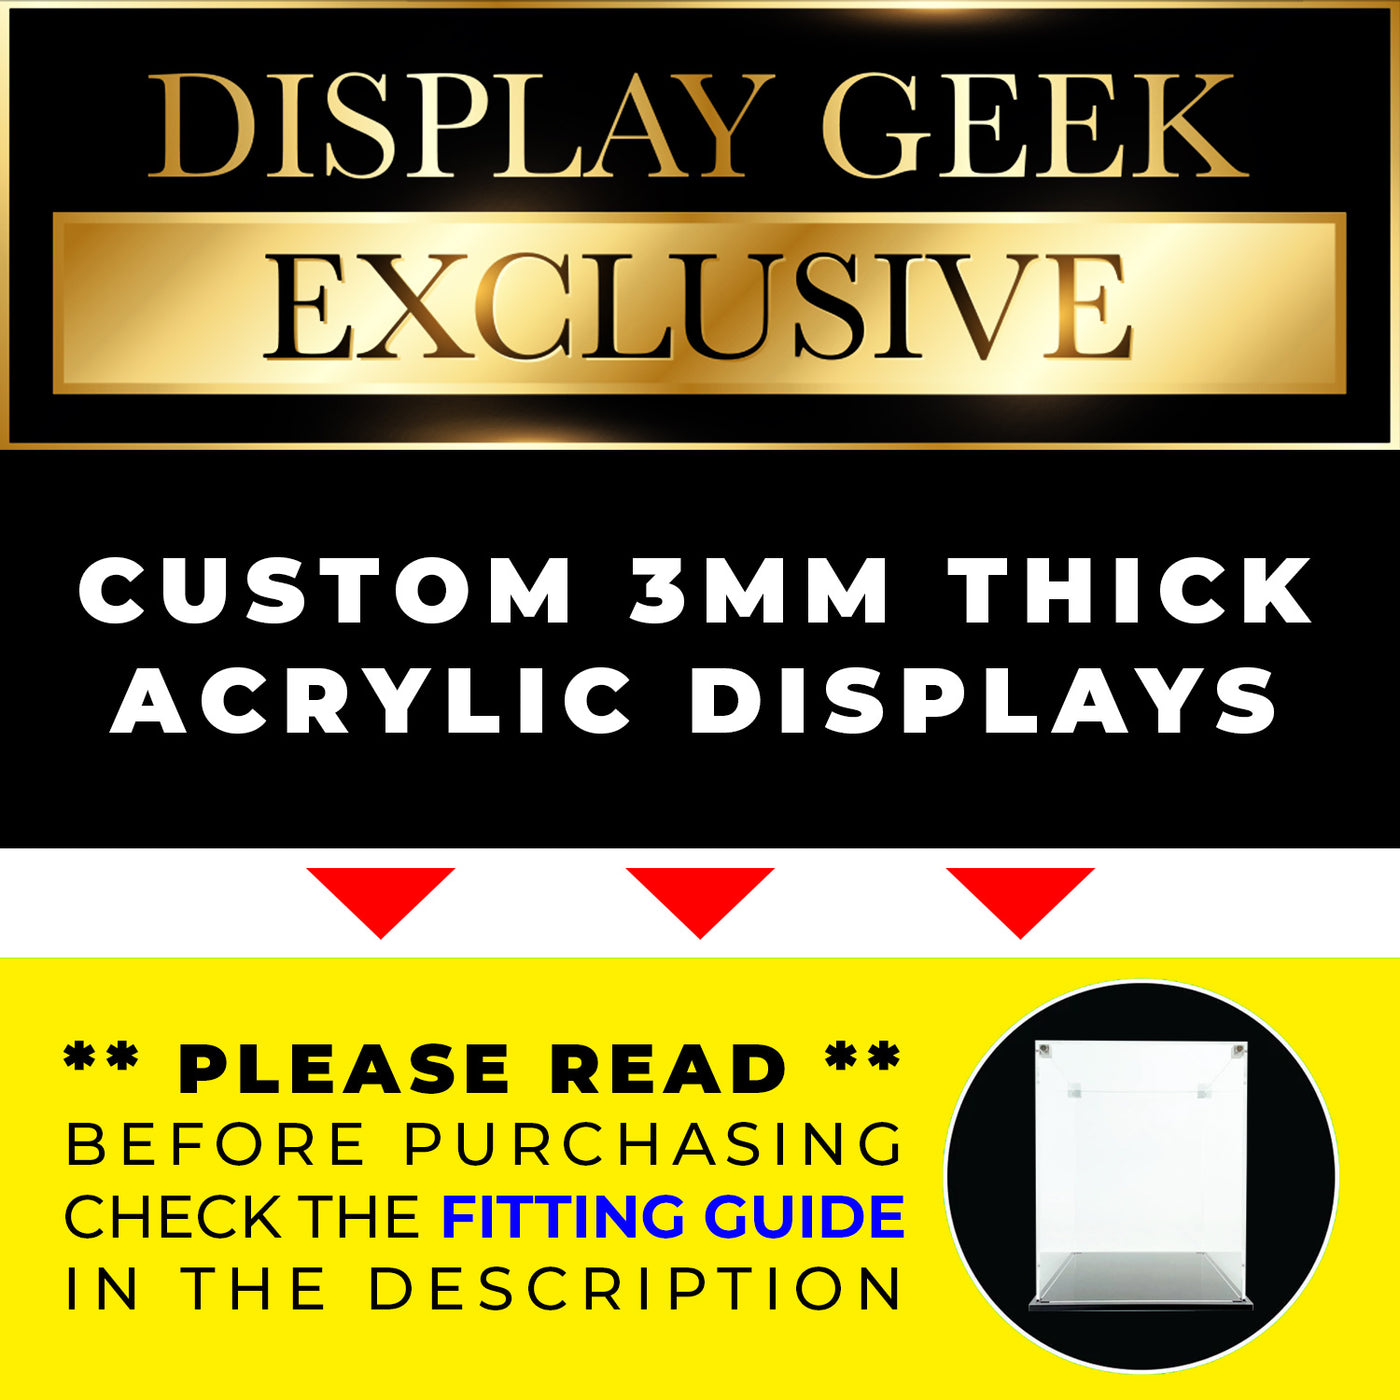 6.25h x 9w x 3.5d Funko 3 Pack Custom Acrylic Display Case for Funko Pop Grails on The Protector Guide App by Display Geek